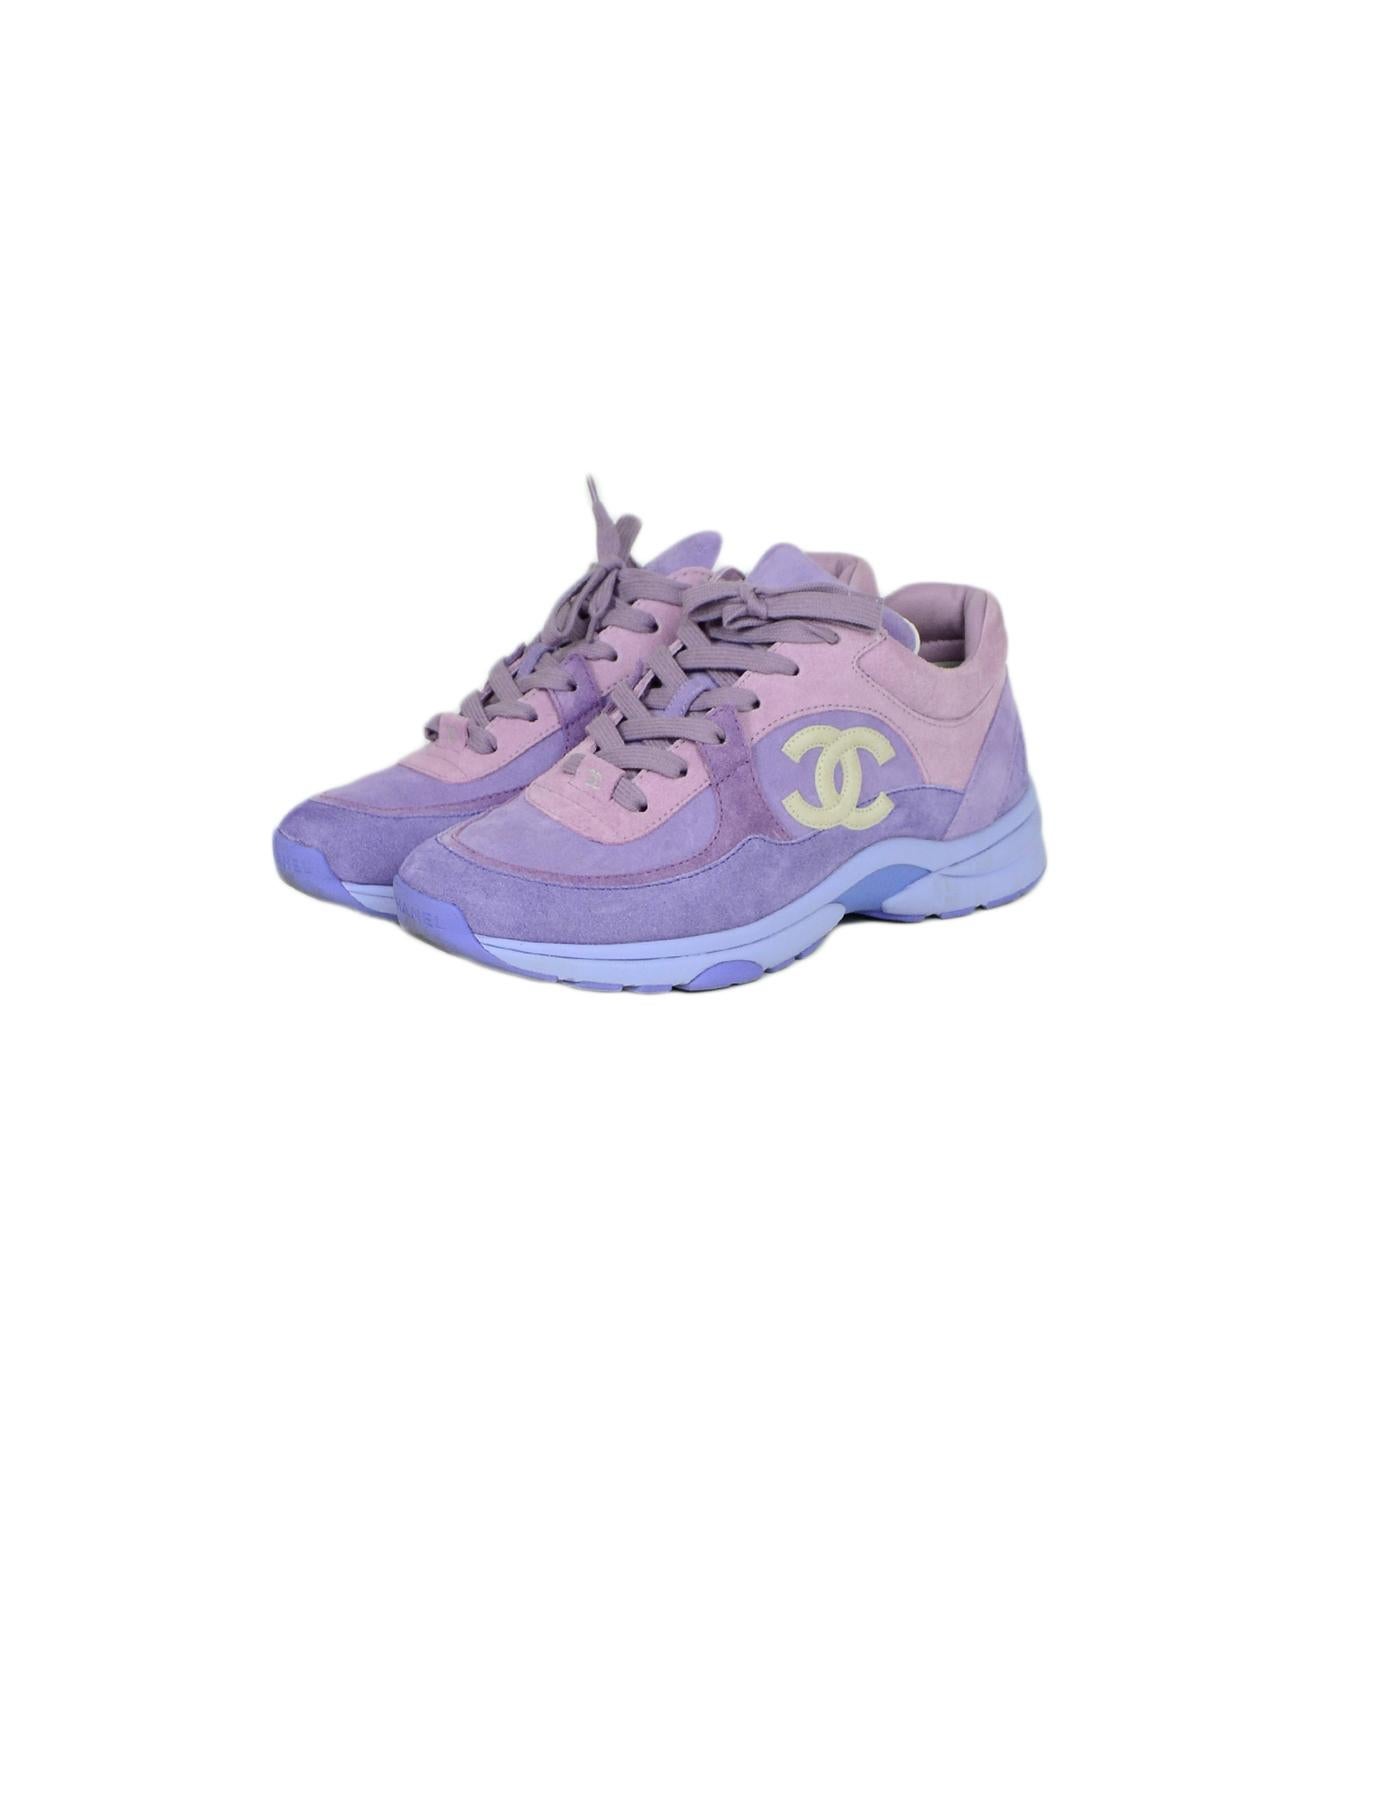 Chanel 2019 Purple Suede Calfskin Leather CC Trainers Sneakers sz 39

Made In: Italy
Year of Production: 2019
Color: Purple
Materials: Suede, calfskin leather
Closure/Opening: Lace-up
Overall Condition: Excellent pre-owned condition, with the